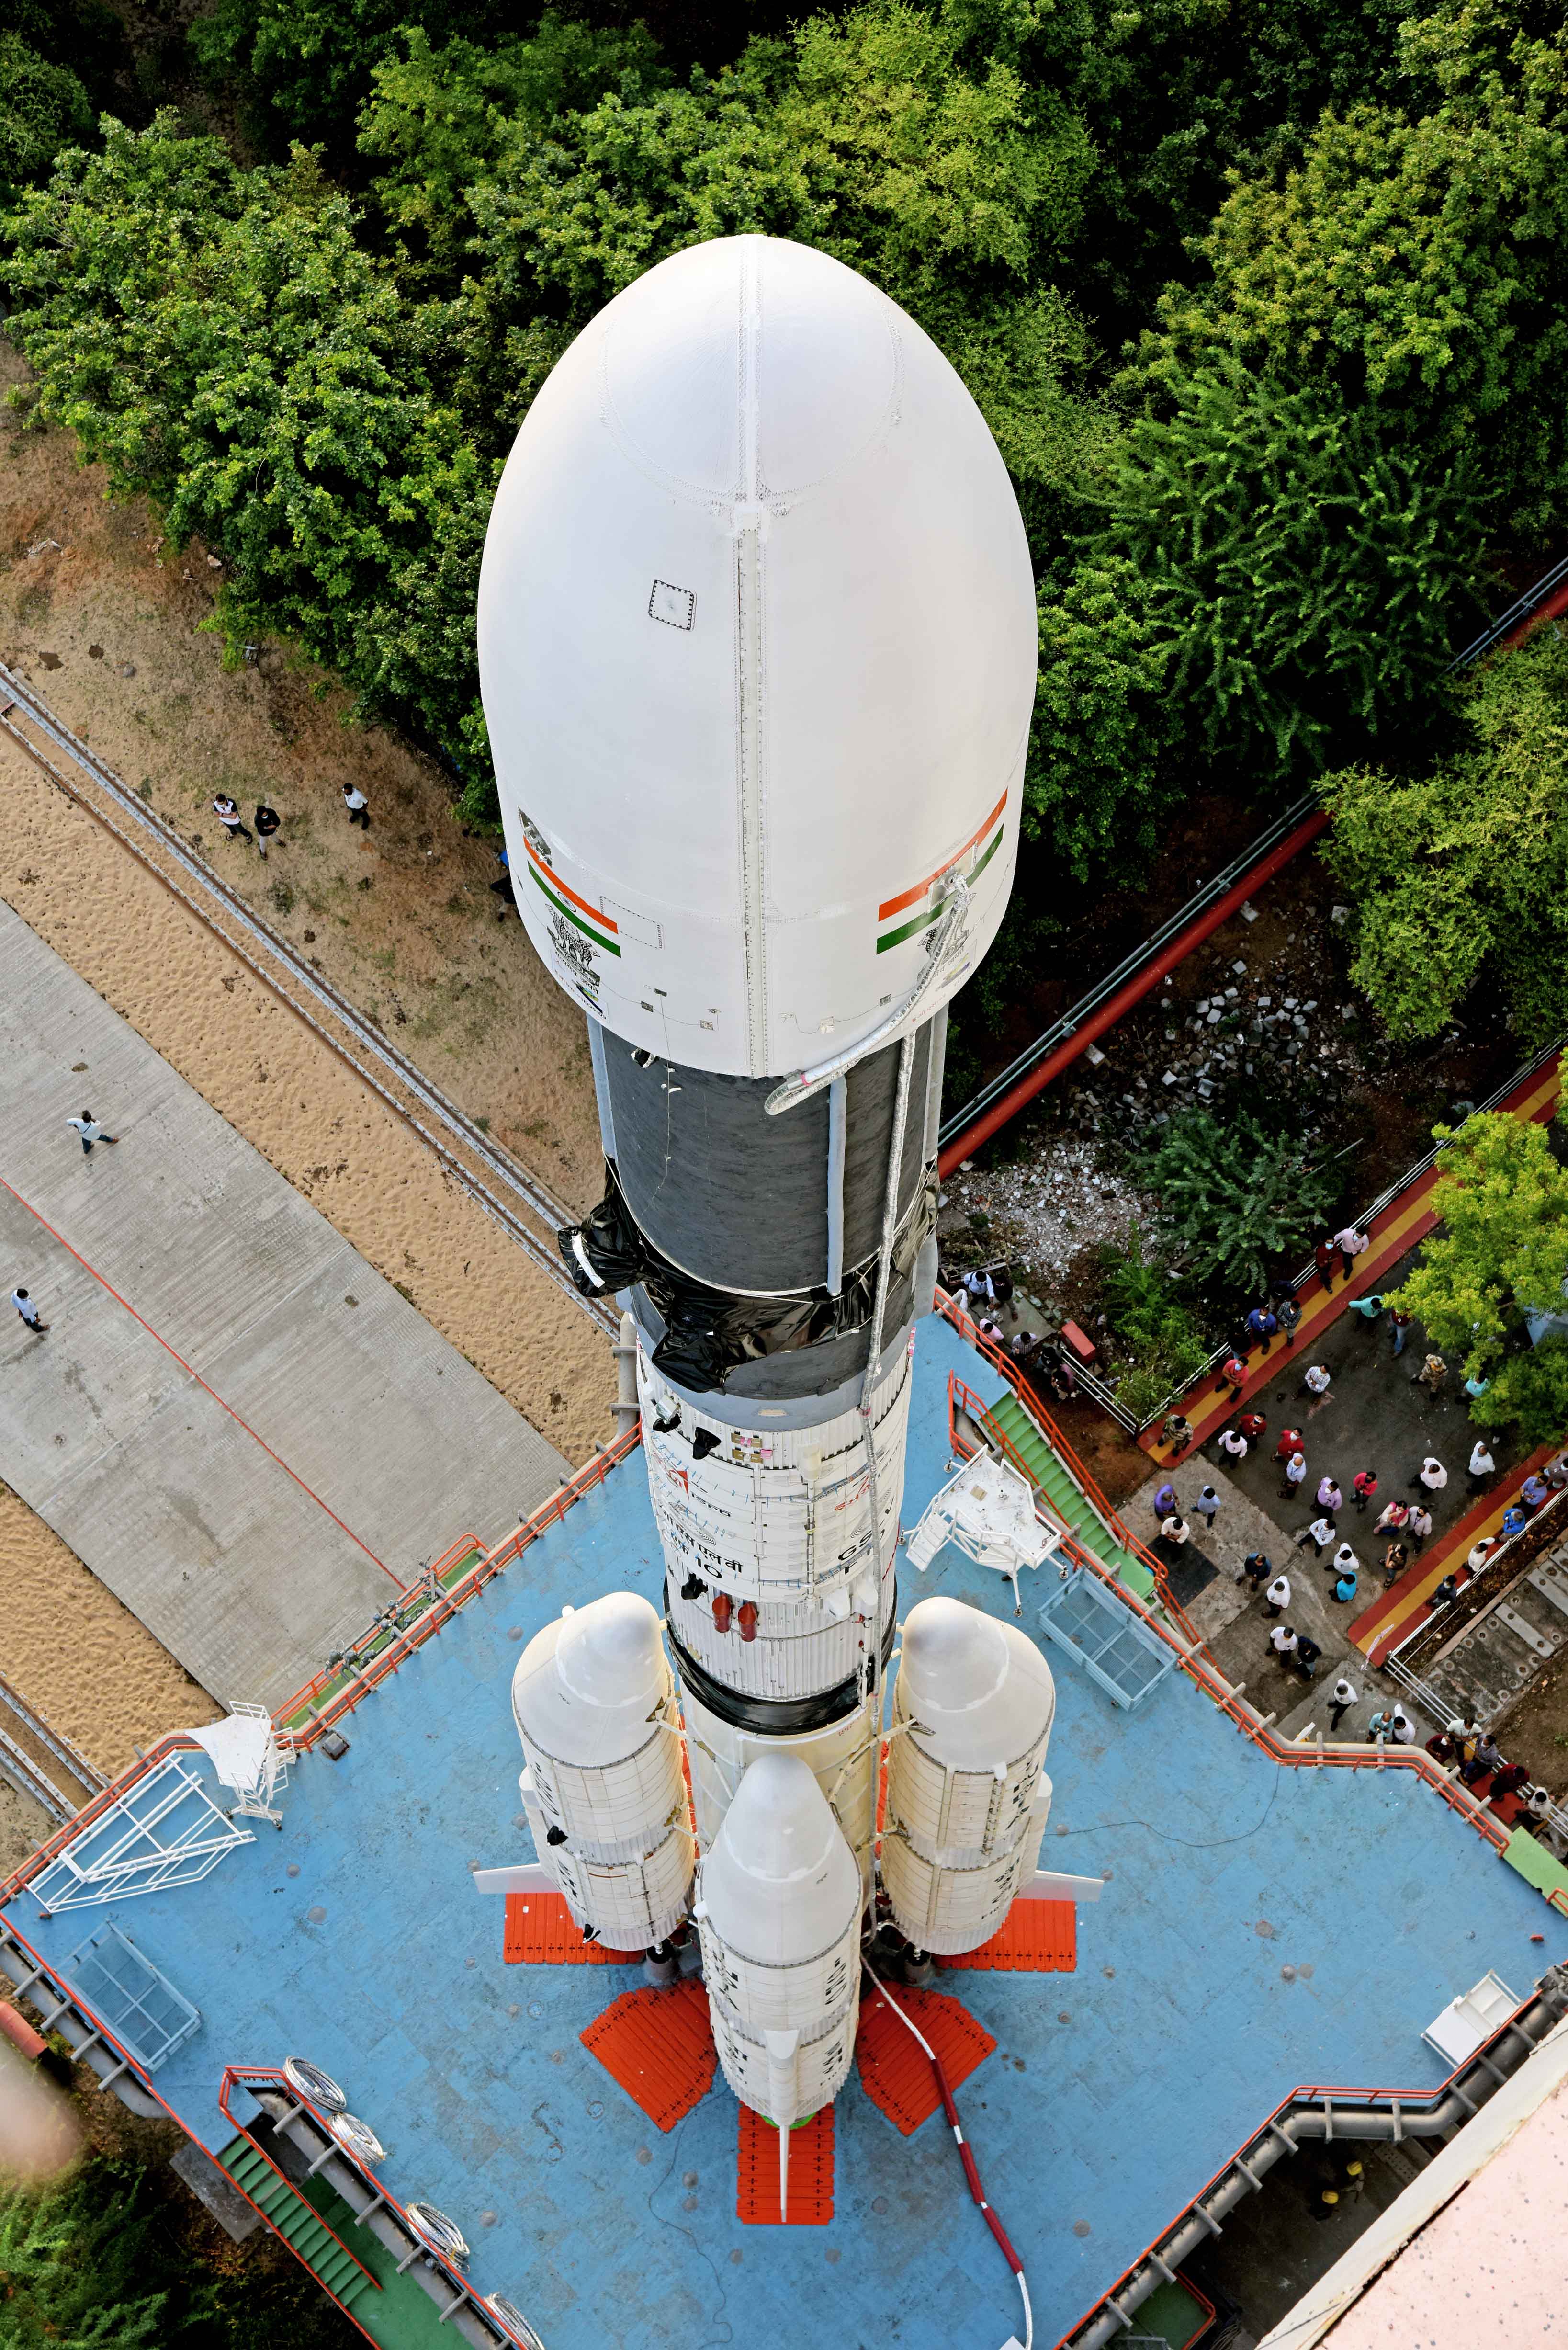 GSLV-F10 mission not fully accomplished, ISRO said